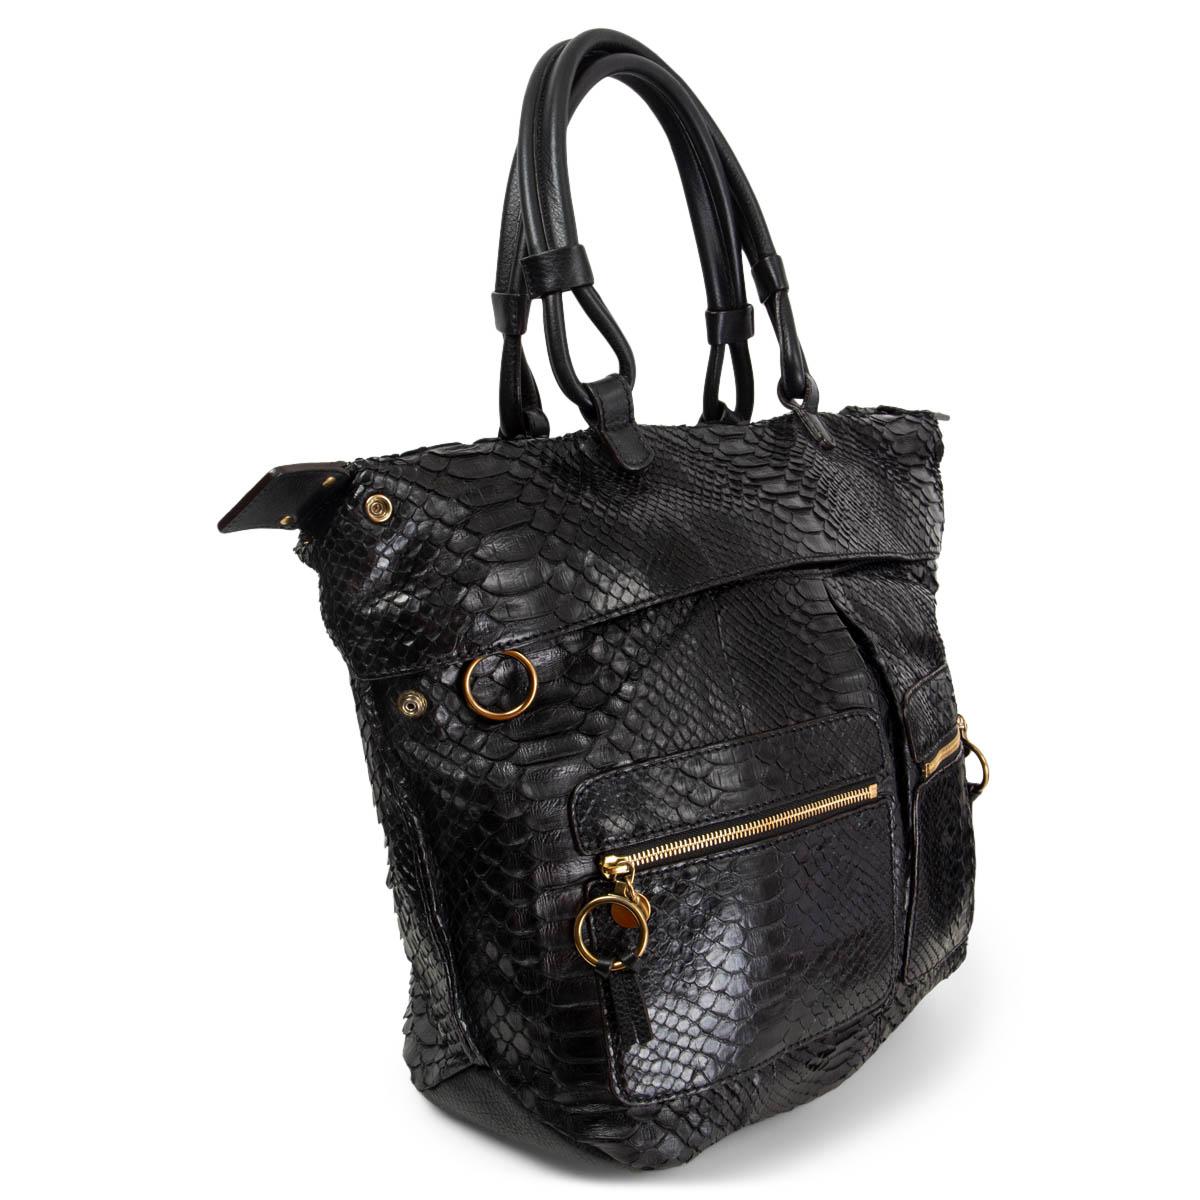 100% authentic Chloé shoulder bag in black python leather with two zipper patch pockets and a big zipper pocket at front. Opens with a zip on top and is lined in beige canvas with two open pockets. The design has two push buttons on the side for